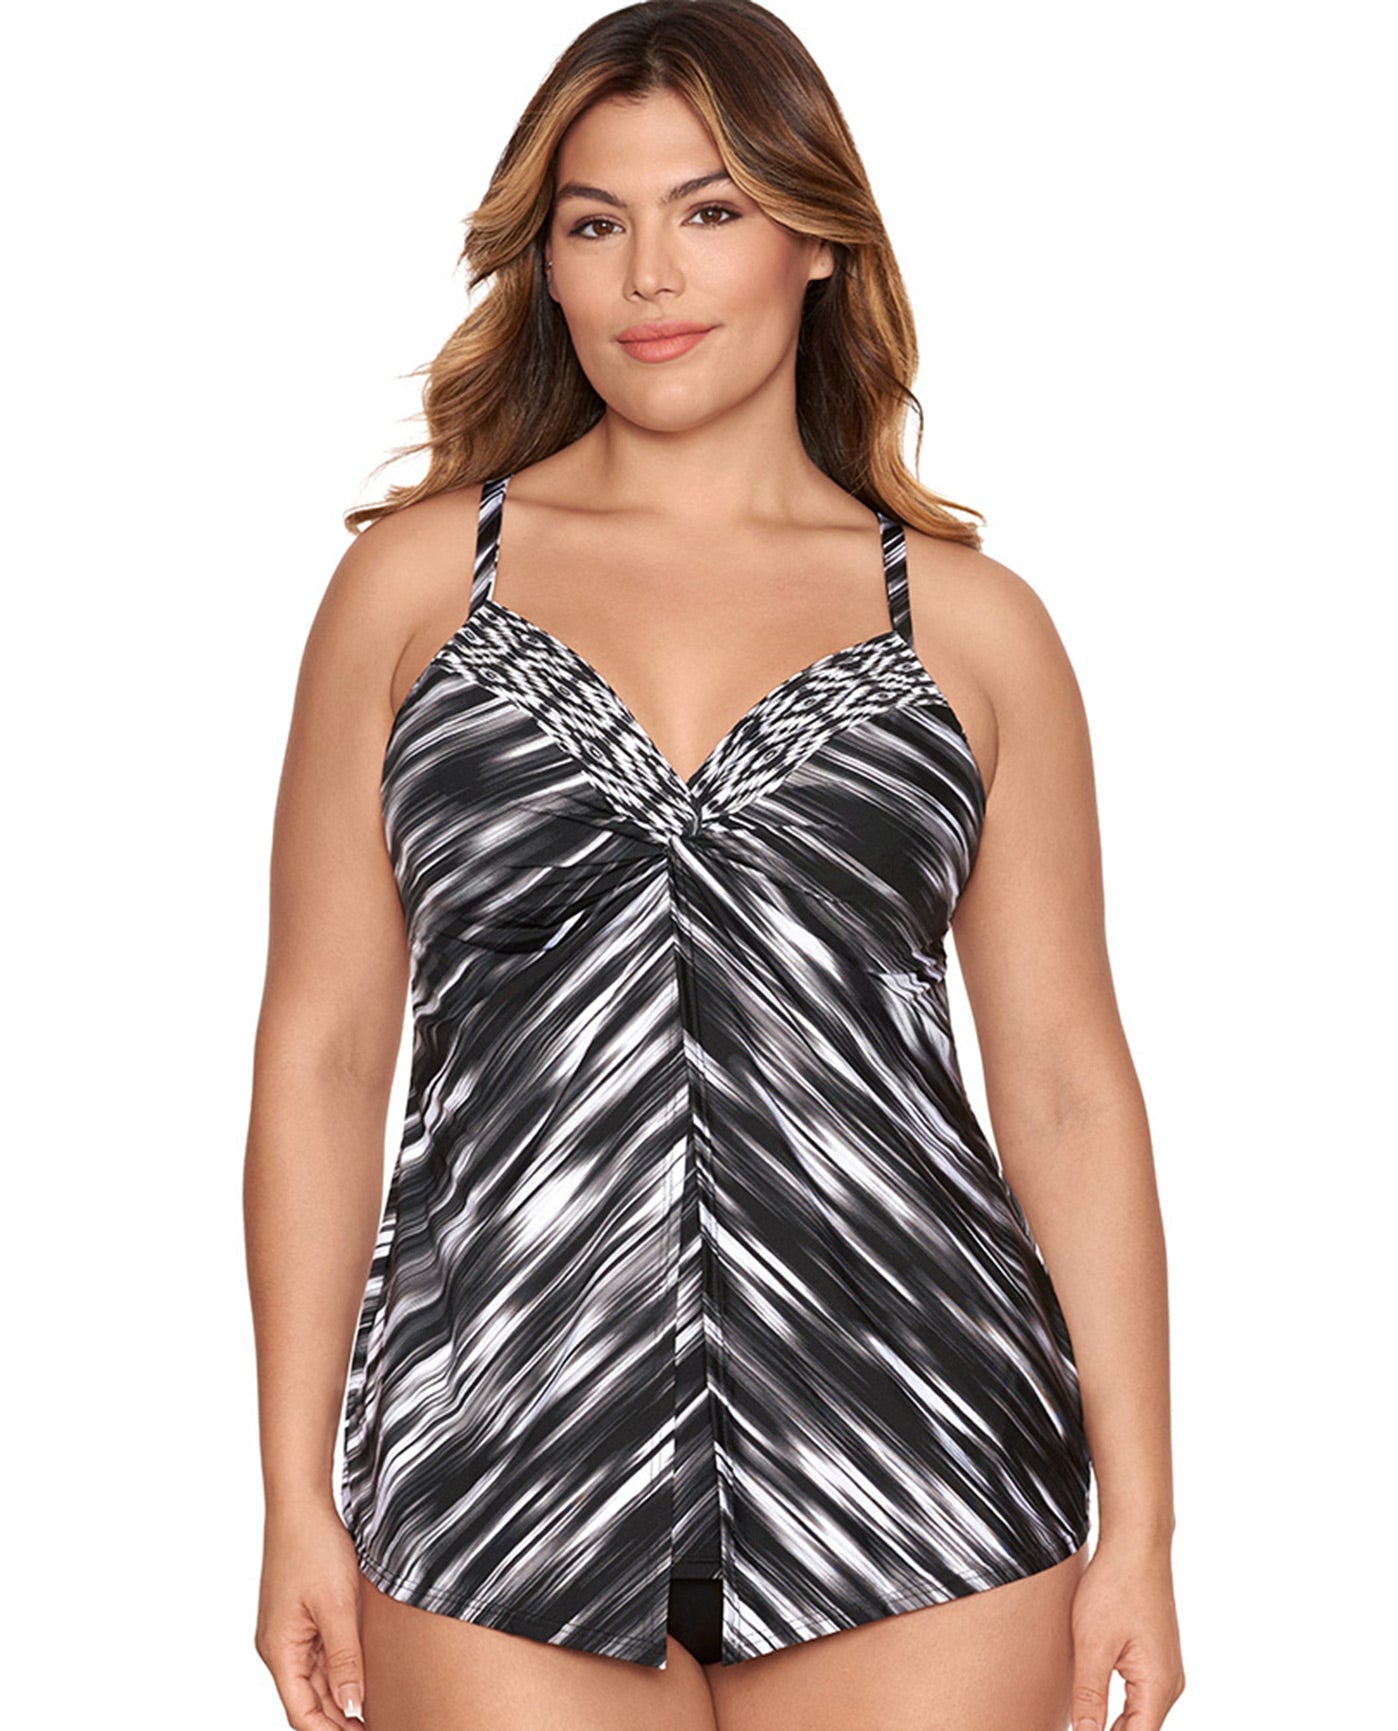 Front View Of Miraclesuit Warp Speed Love Knot Underwire Plus Size Tankini Top | MIR Black White